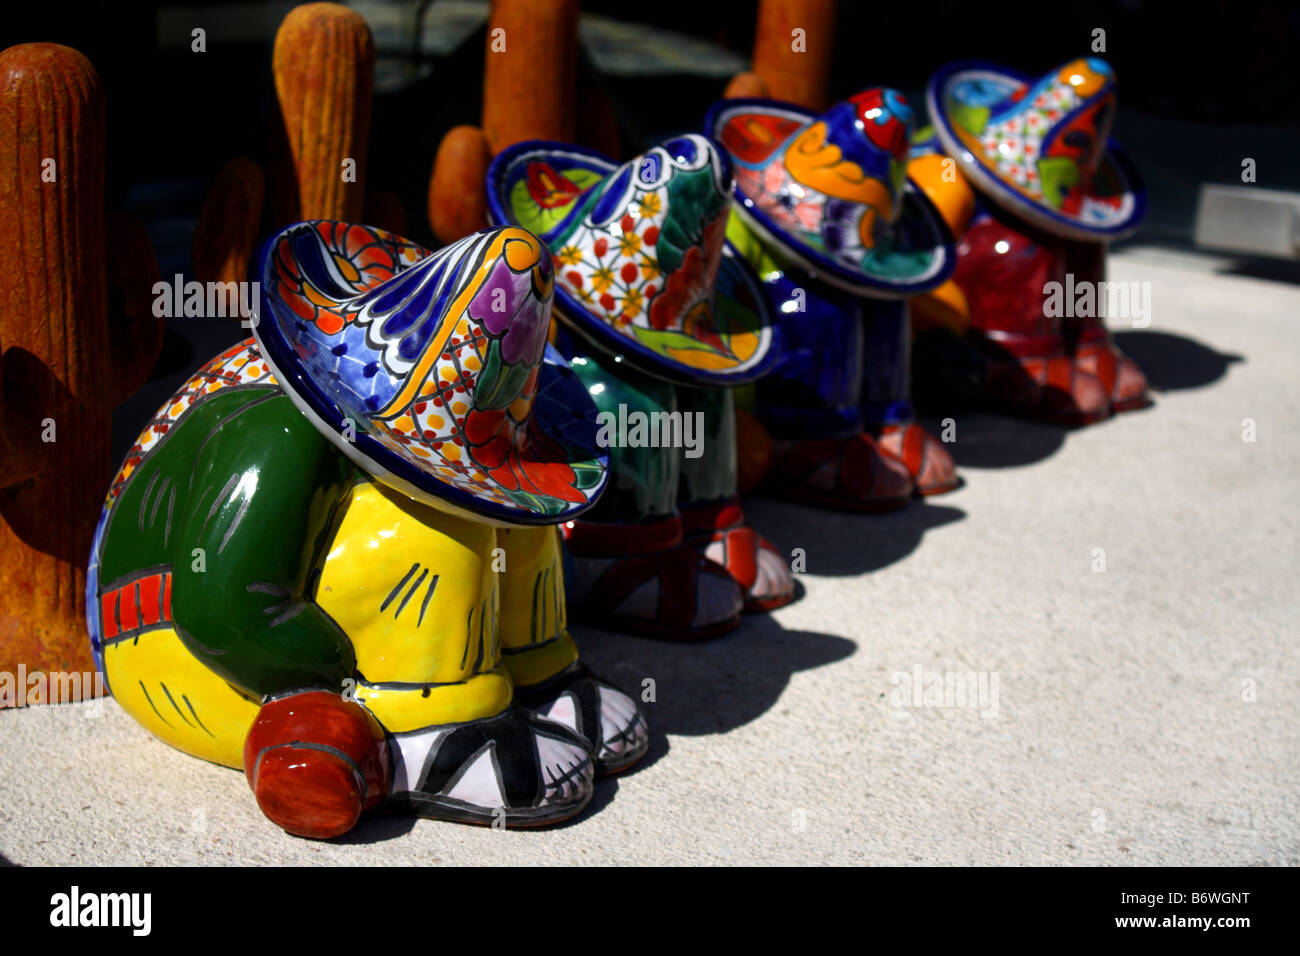 Mexican ceramics sitting in a row Stock Photo